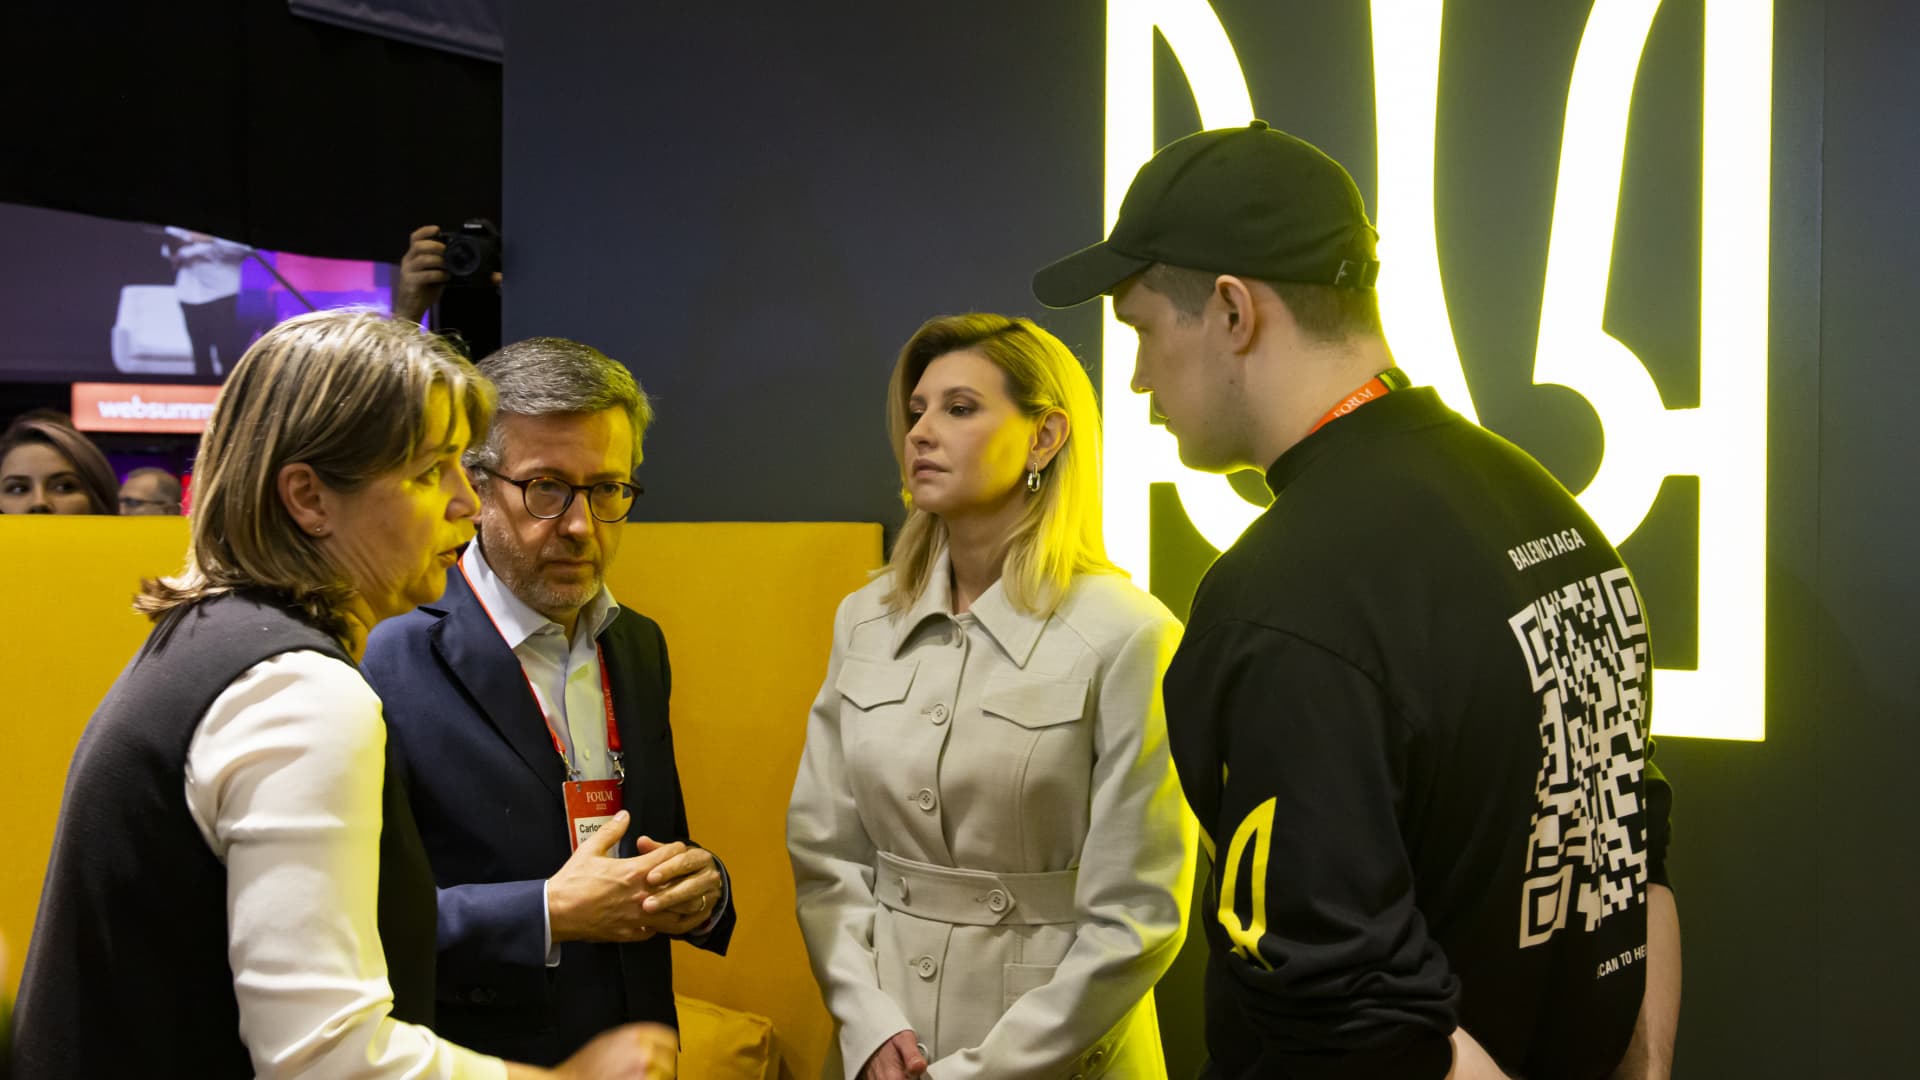 Ukraine Vice Prime Minister Mykhailo Fedorov (right) and First Lady Olena Zelenska (center) attend the Ukraine booth at Web Summit 2022.